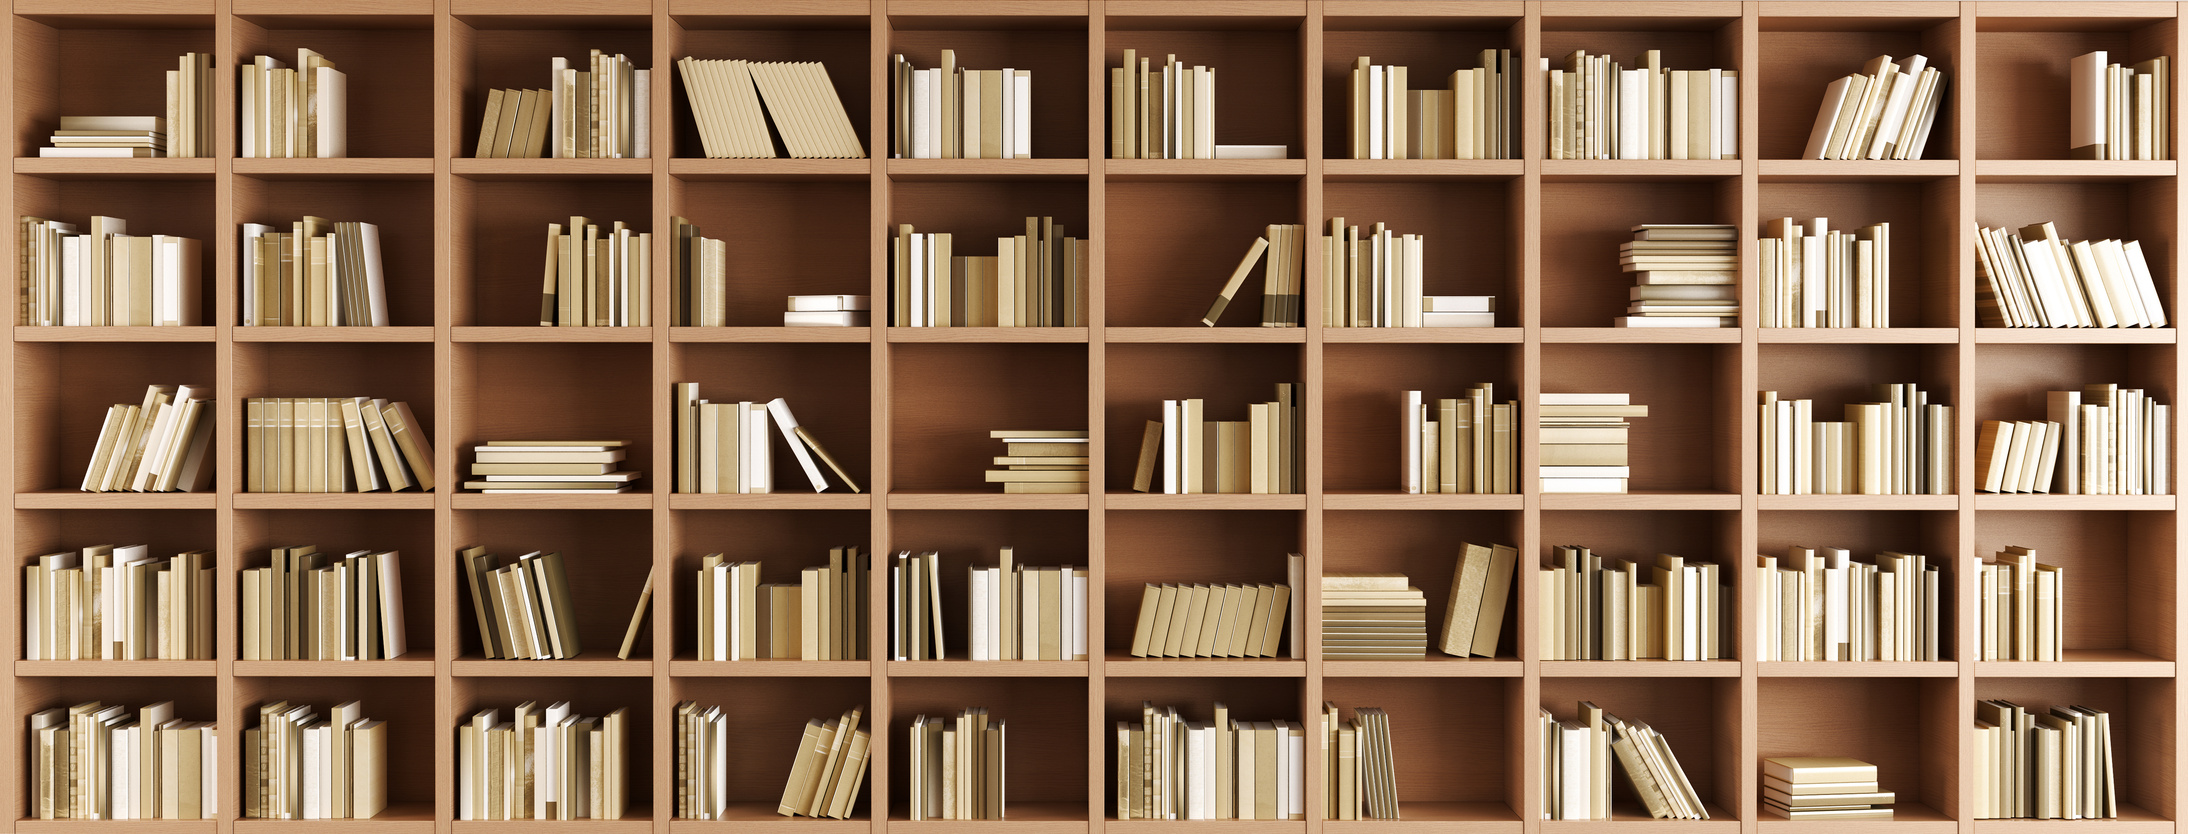 Bookcase containing cubed shelves full of books